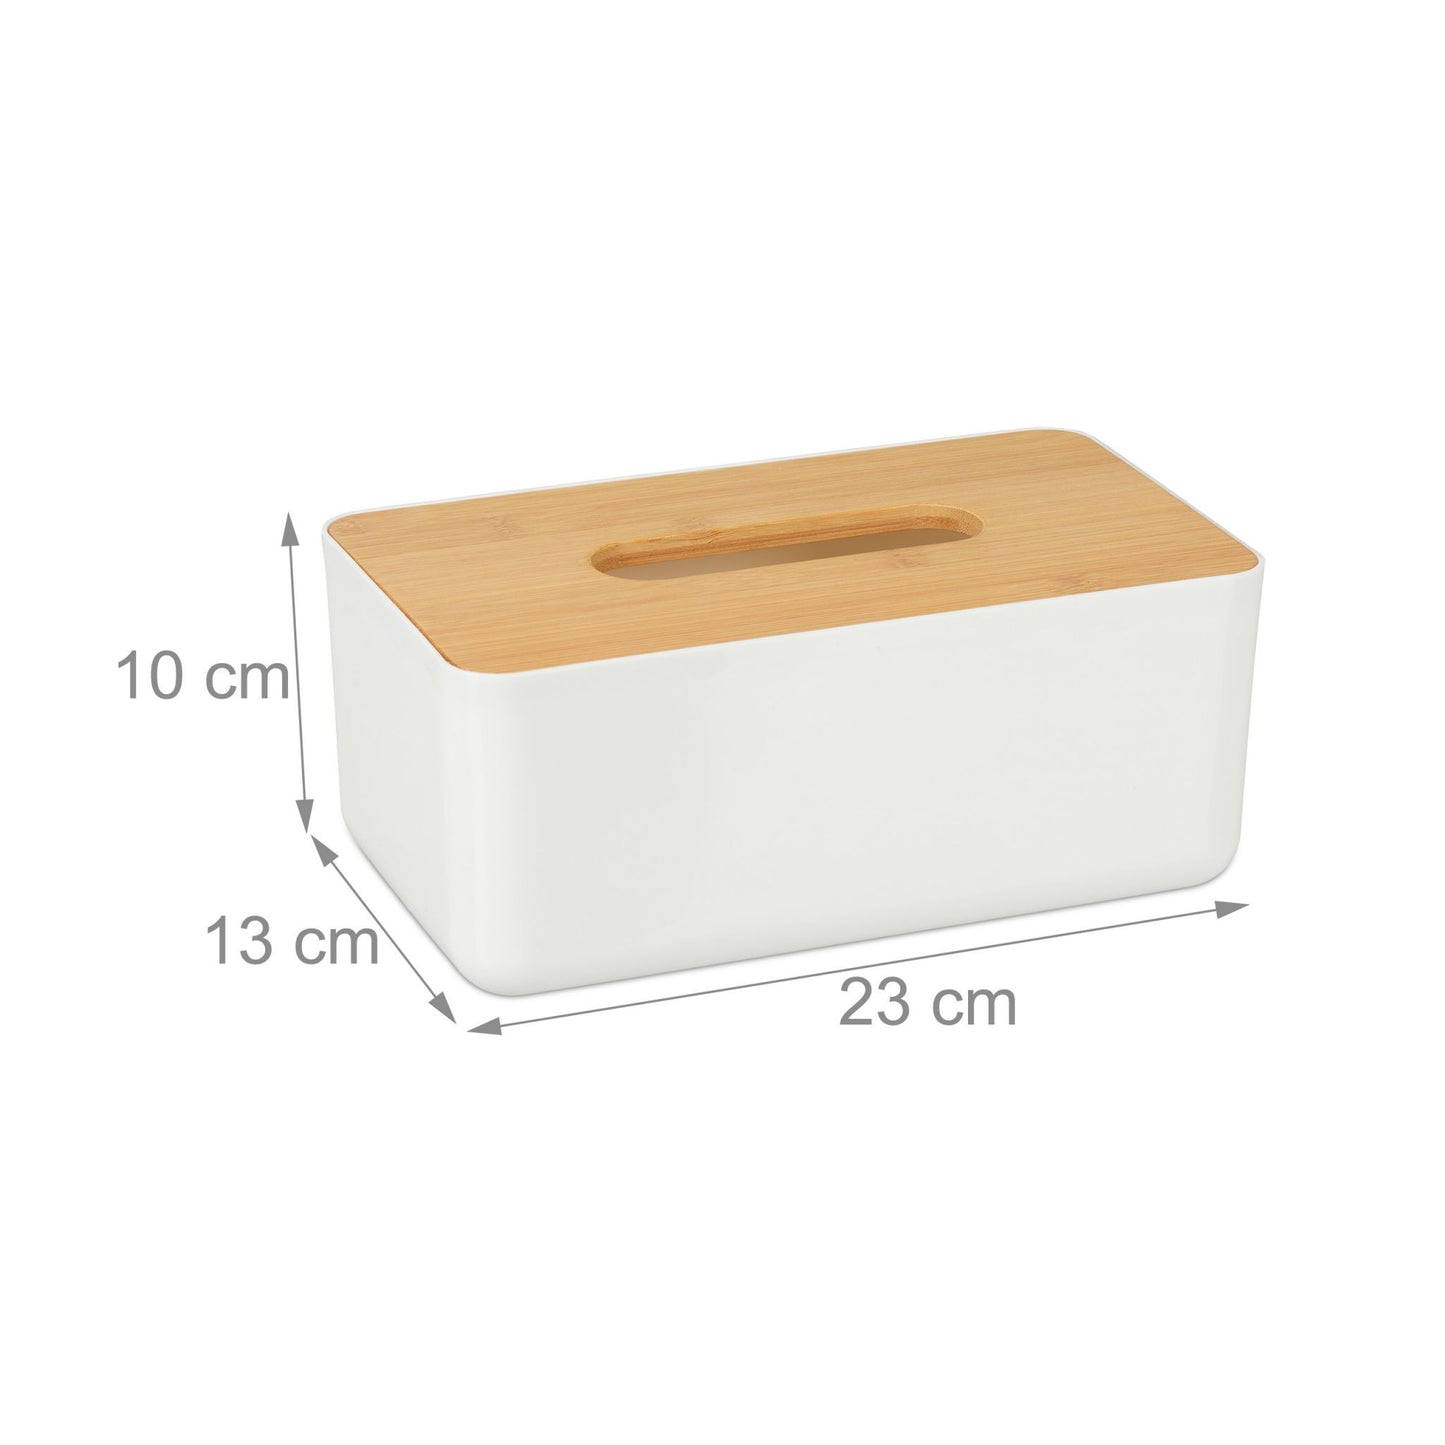 RelaxDays Tissue Box with Bamboo Top XL Bamboo Bathrooms